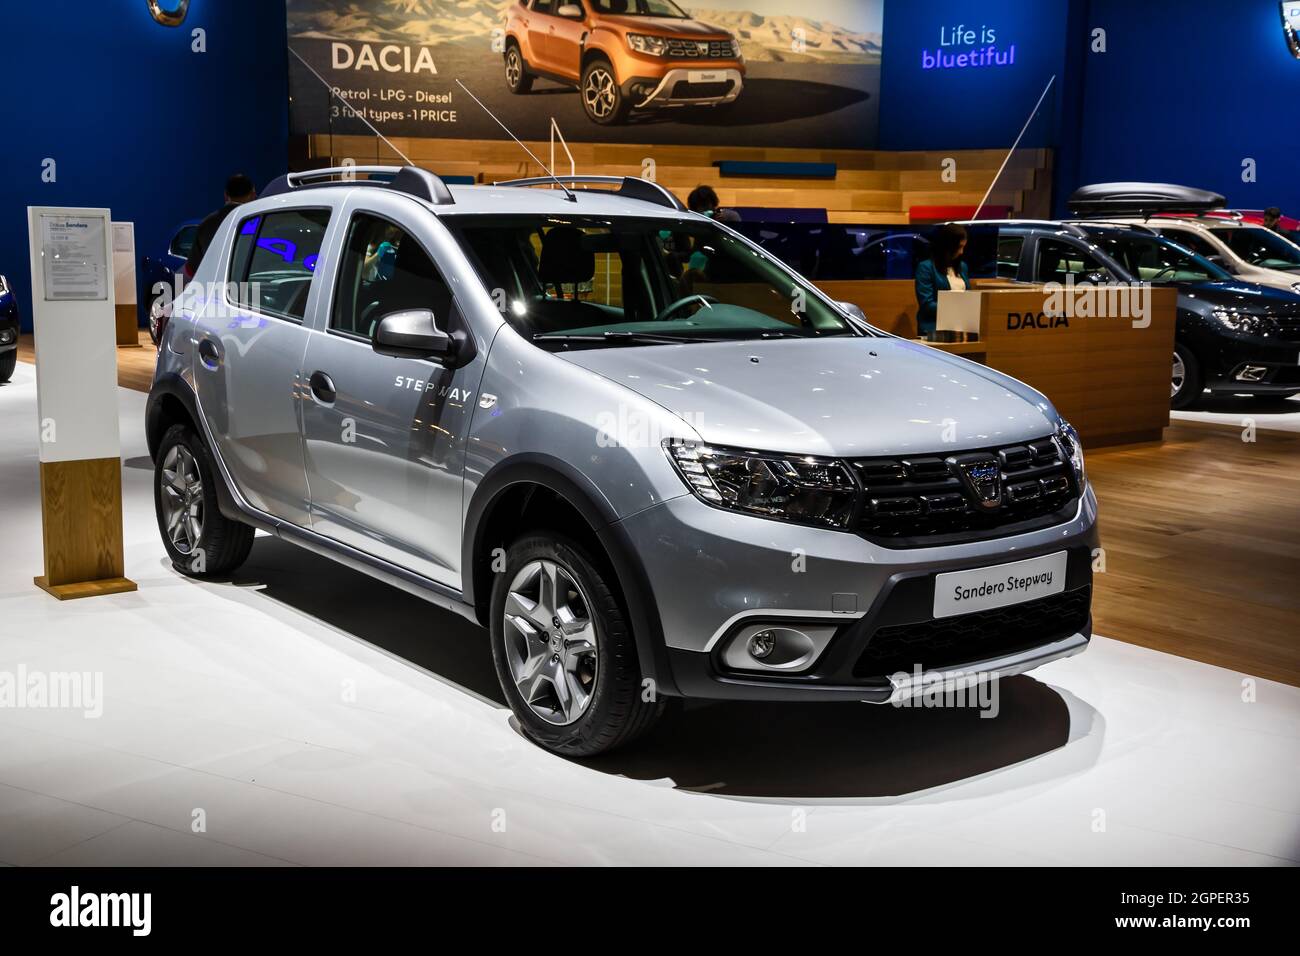 Dacia 2021 High Resolution Stock Photography and Images - Alamy